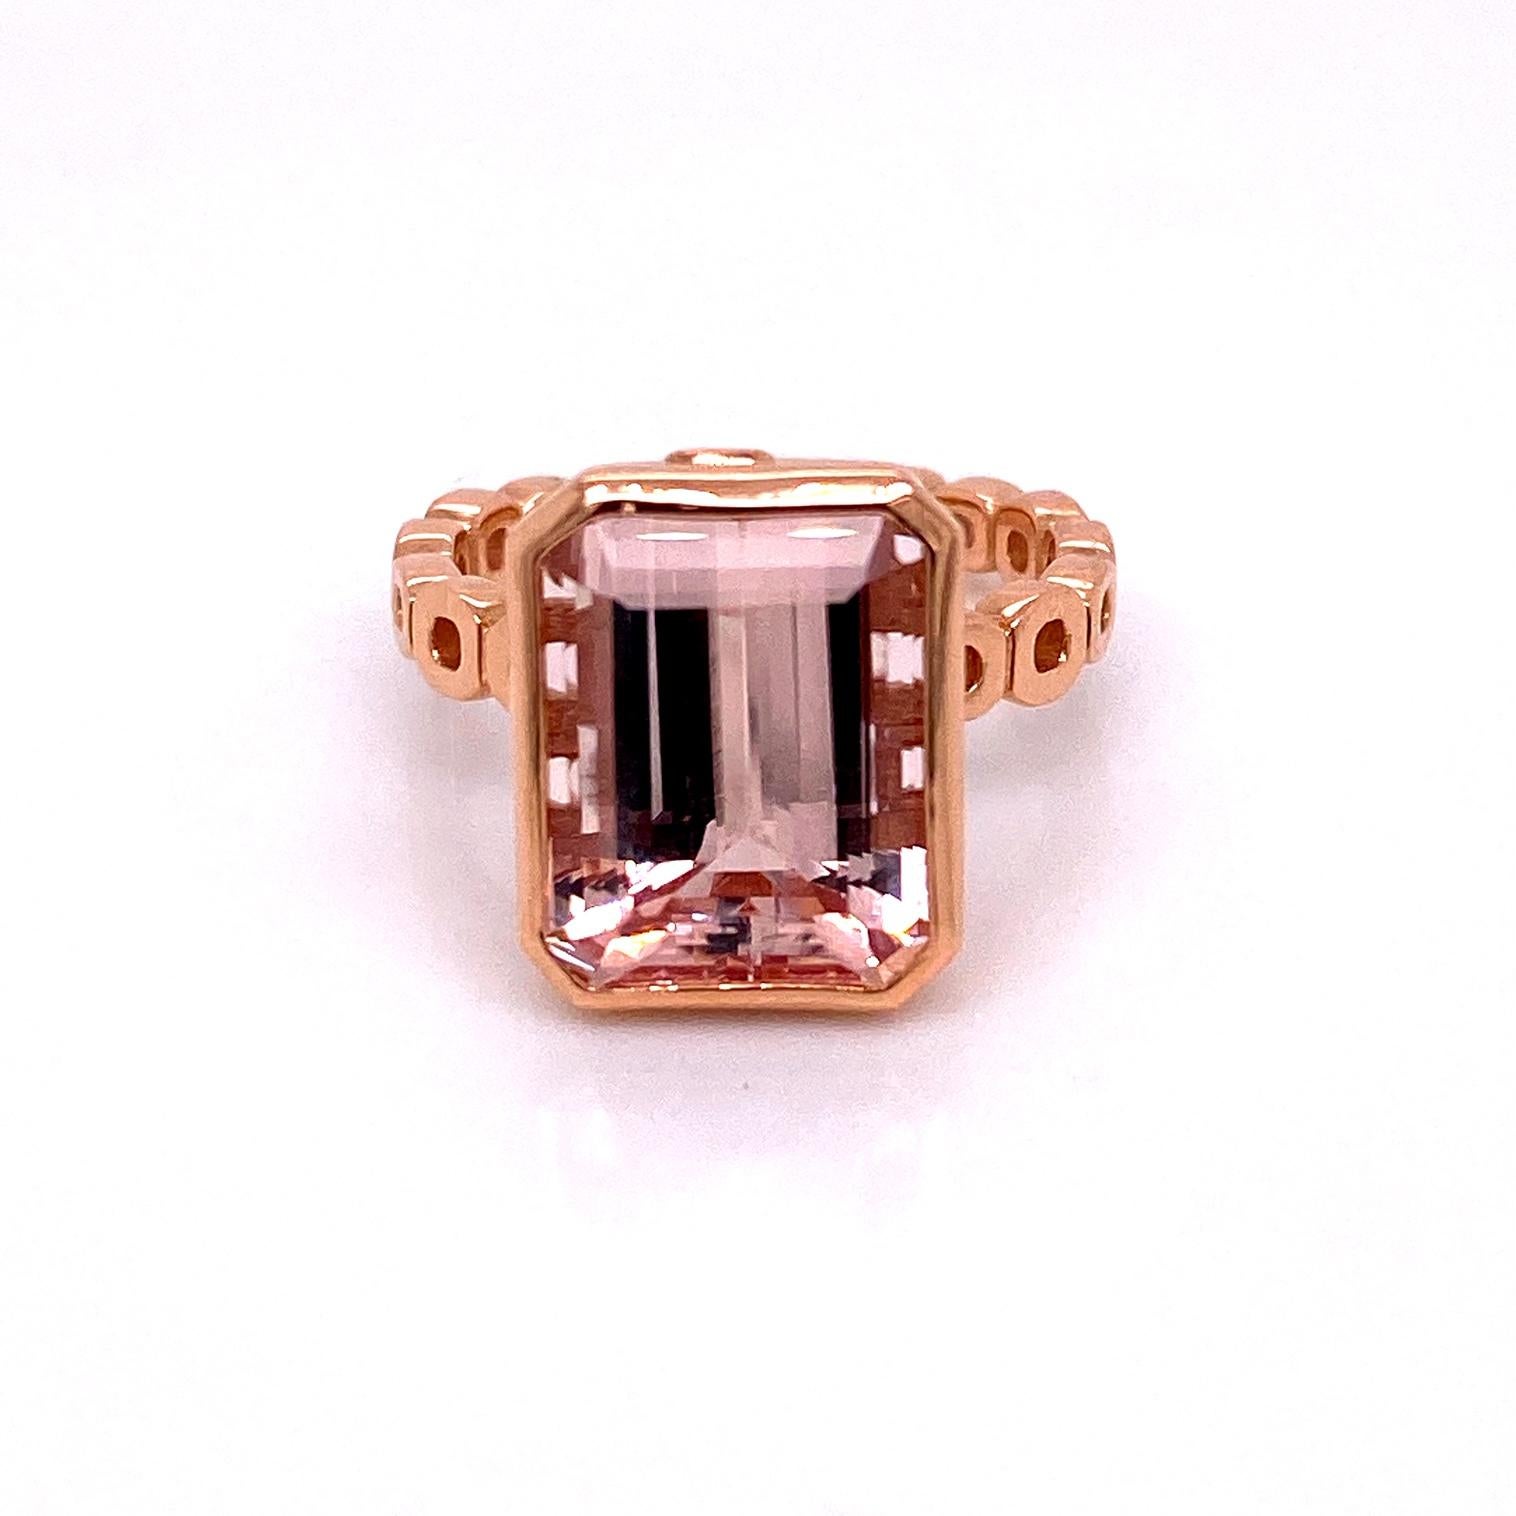 An 18k rose gold ring set with an emerald cut 7.78 carat morganite. Ring size 6.5. This ring was made and designed by llyn strong.